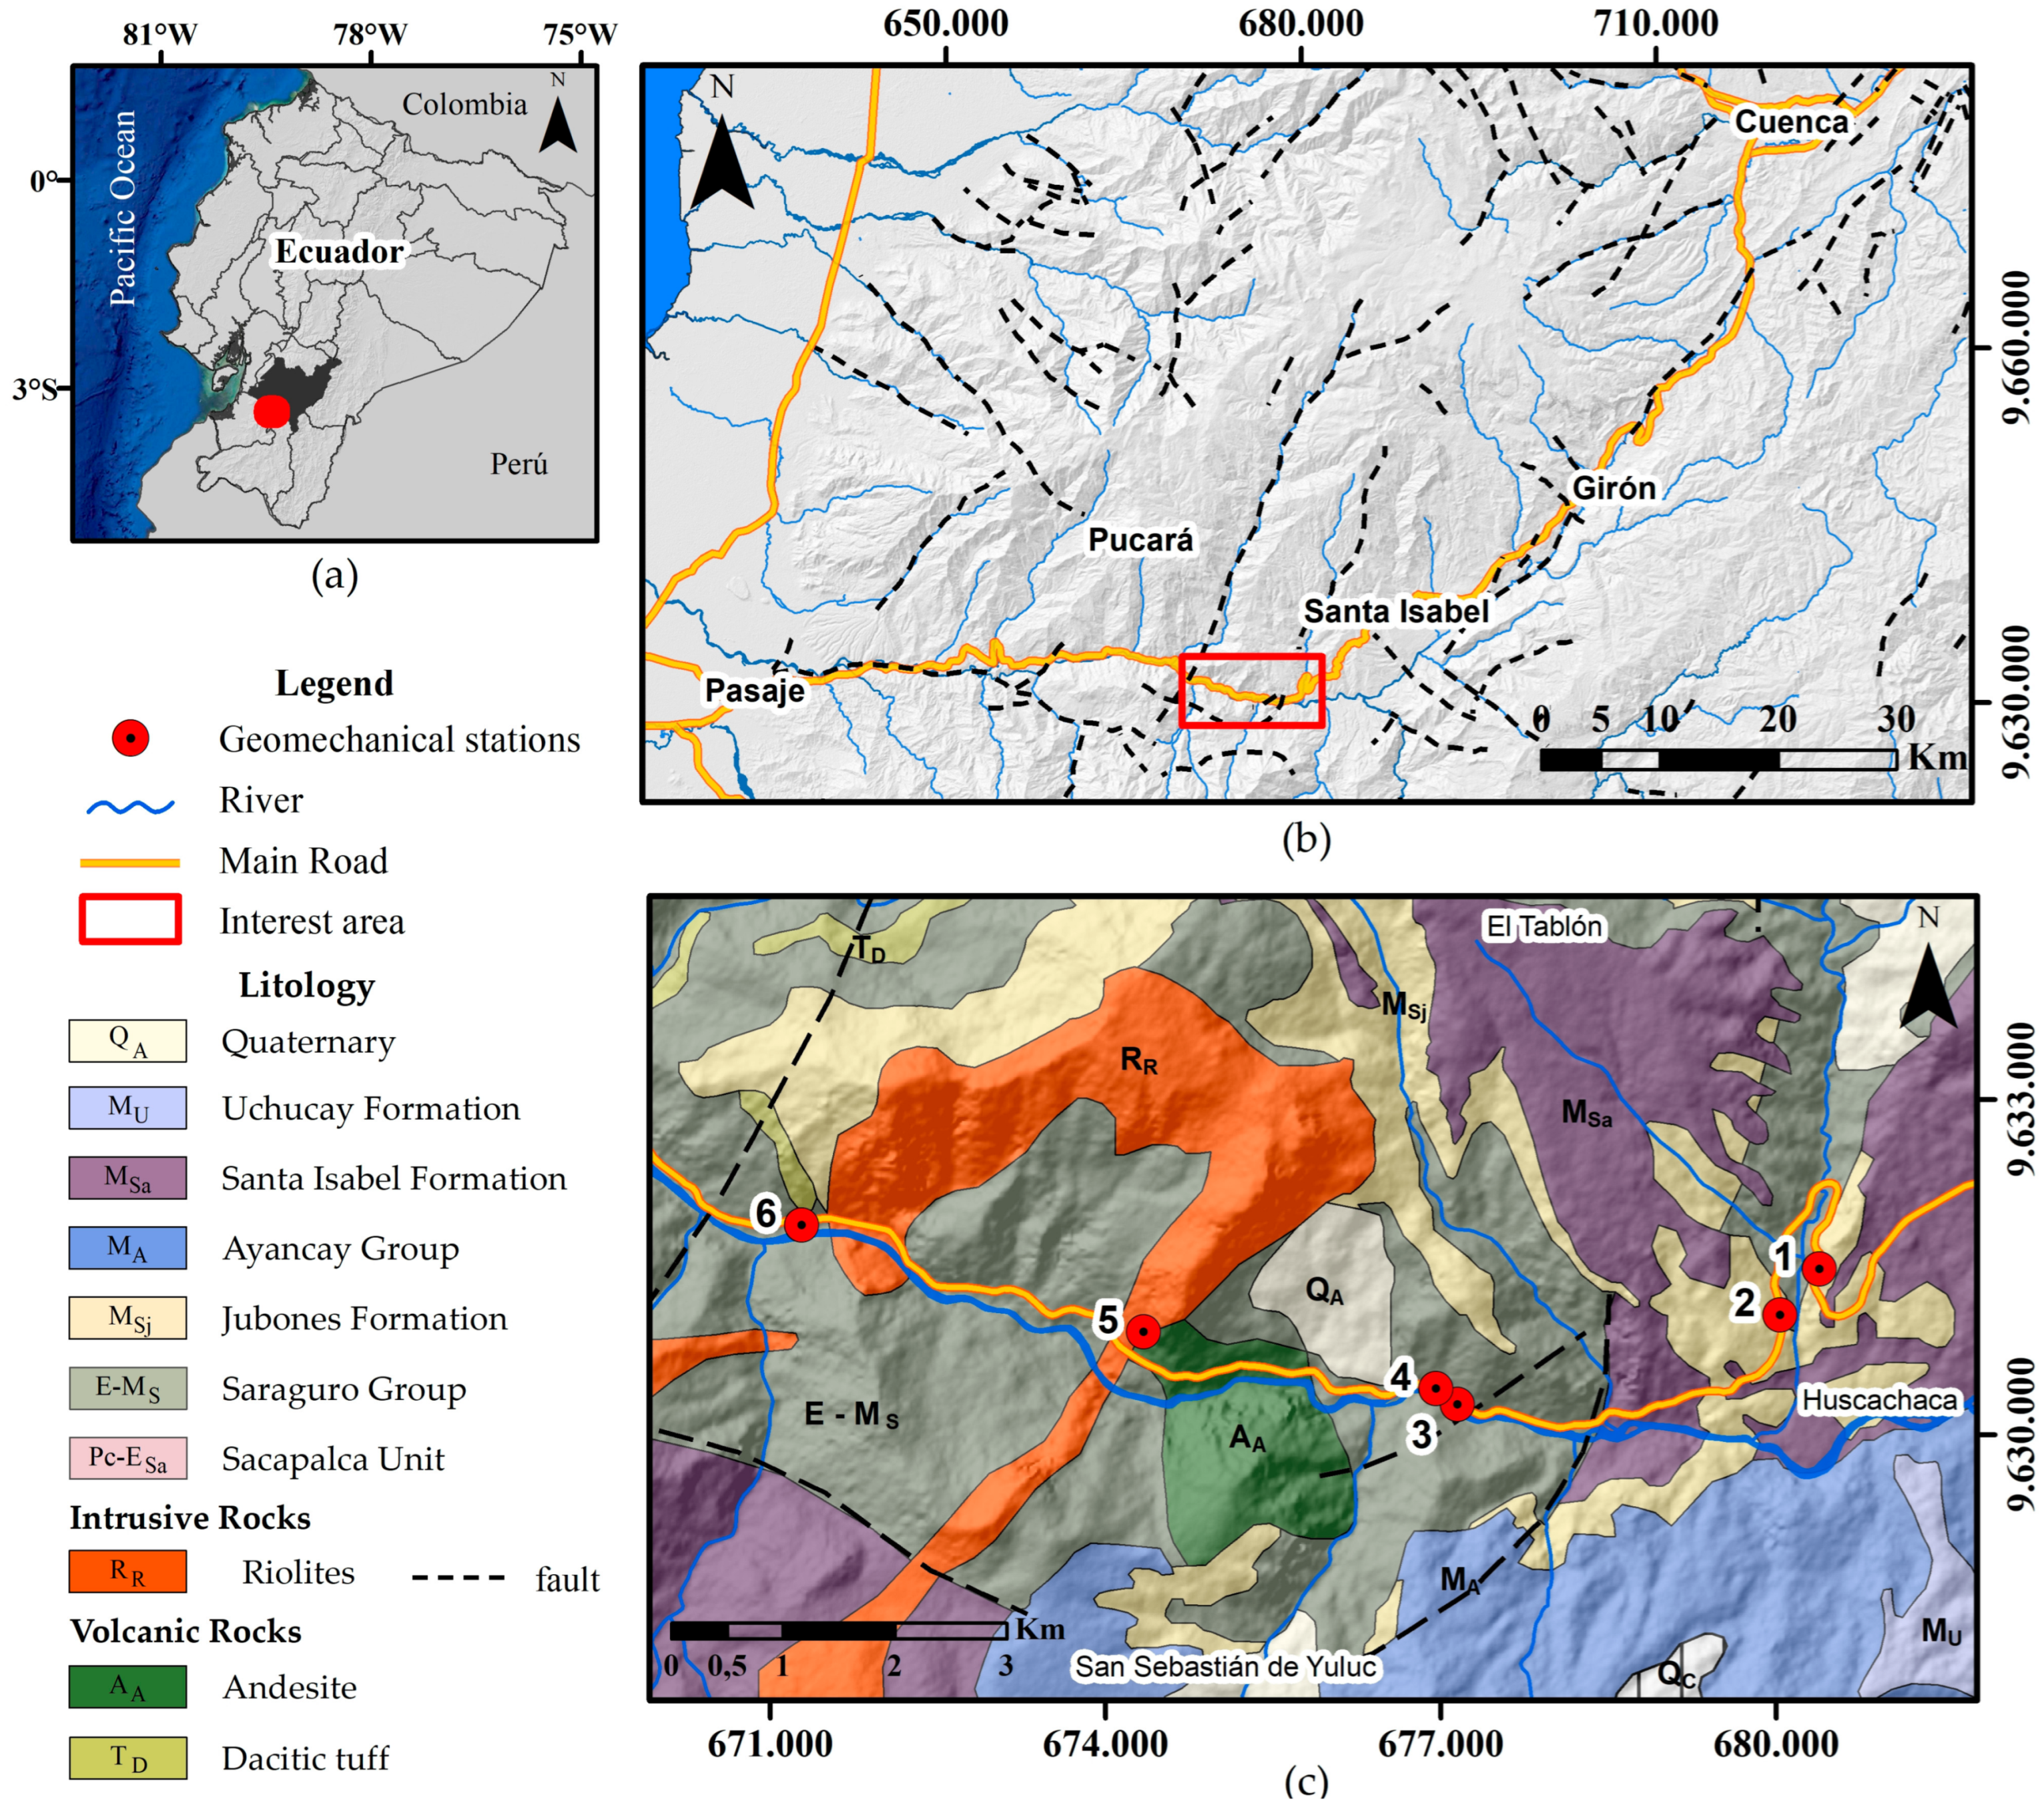 Remote Sensing | Free Full-Text | Stability Analysis of Rocky Slopes on the  Cuenca&ndash;Gir&oacute;n&ndash;Pasaje Road, Combining Limit Equilibrium  Methods, Kinematics, Empirical Methods, and Photogrammetry